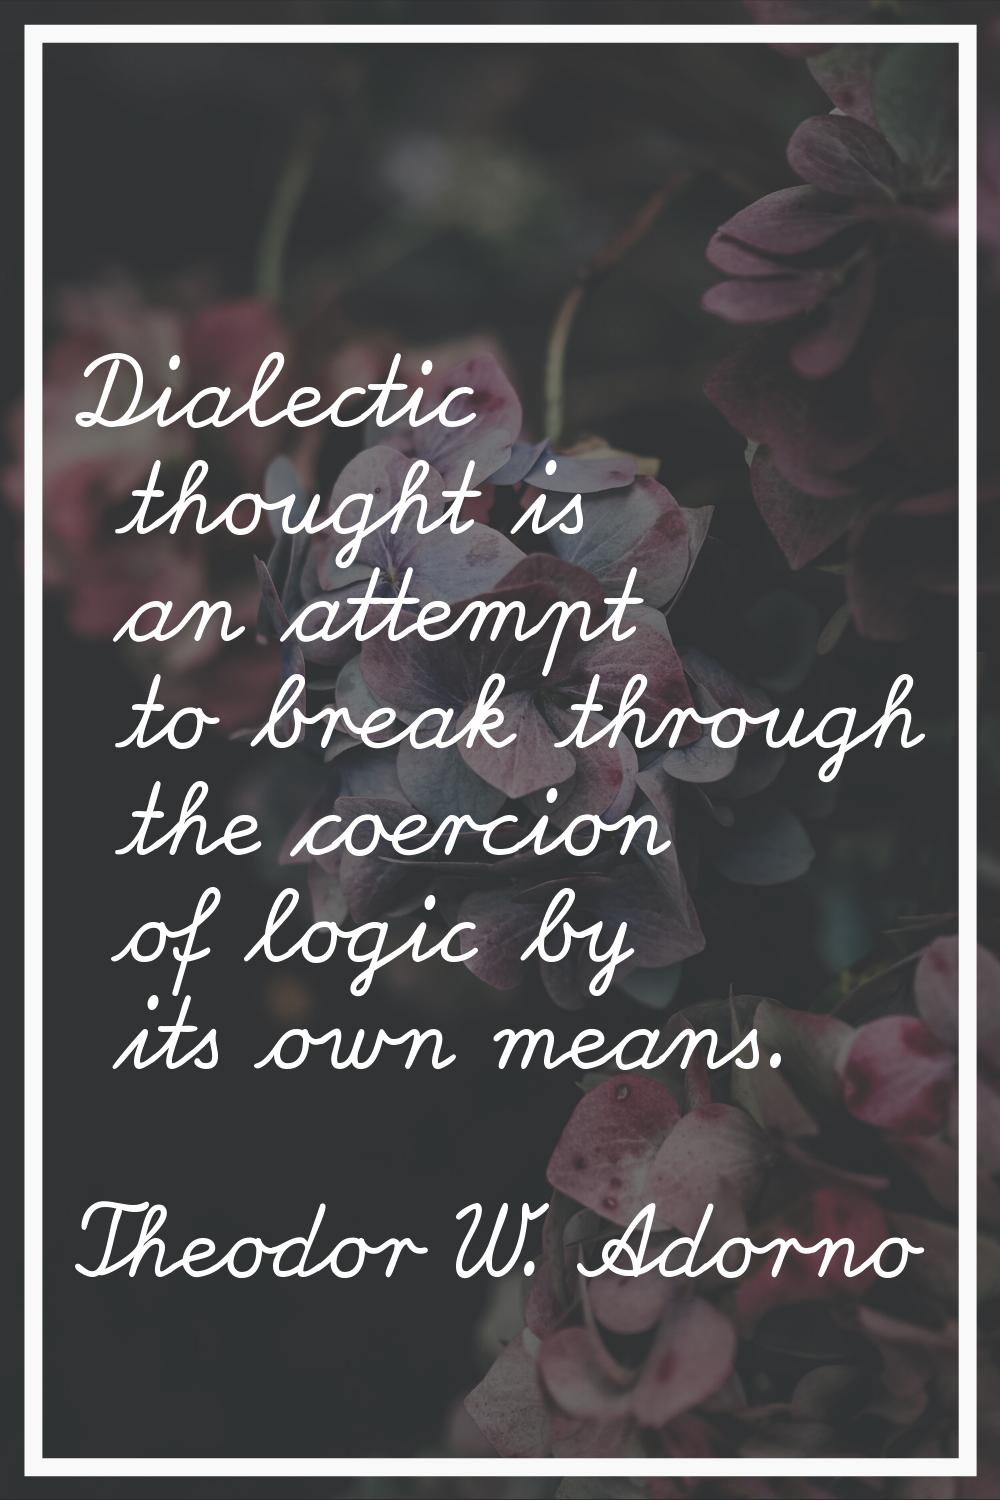 Dialectic thought is an attempt to break through the coercion of logic by its own means.